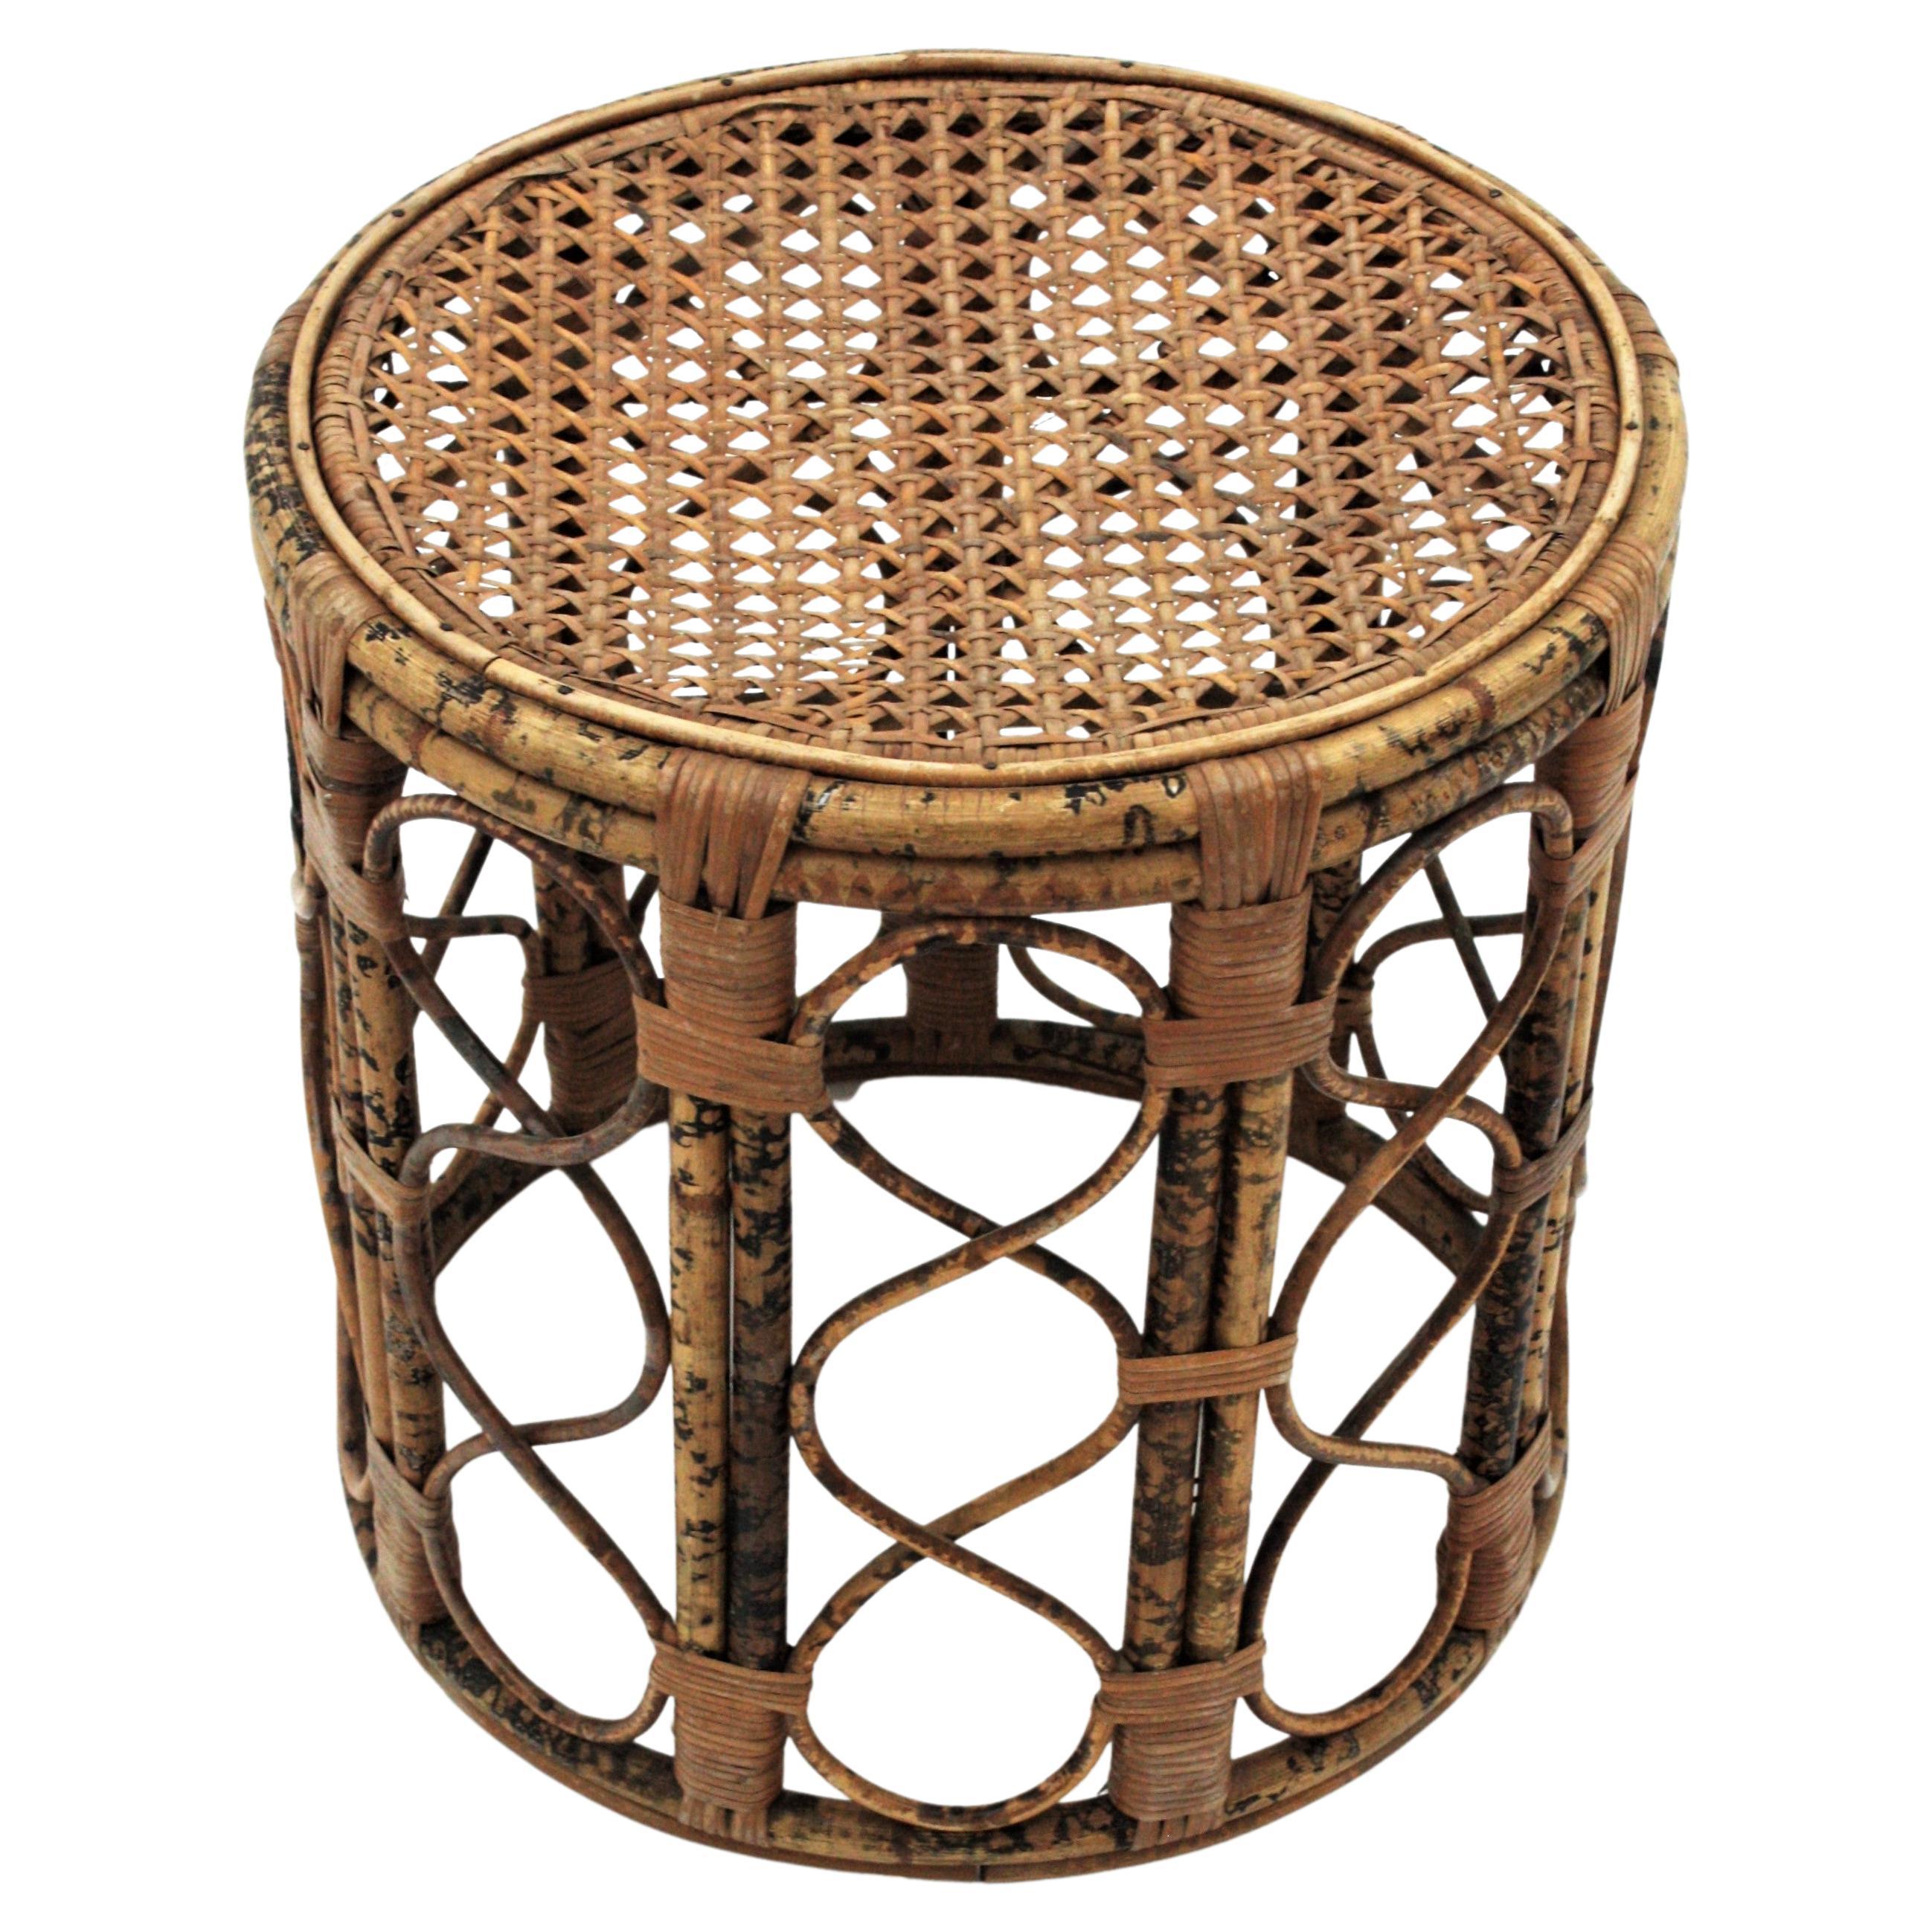 French Side Table or Stool in Tiger Bamboo Rattan with Woven Wicker Top, 1940s